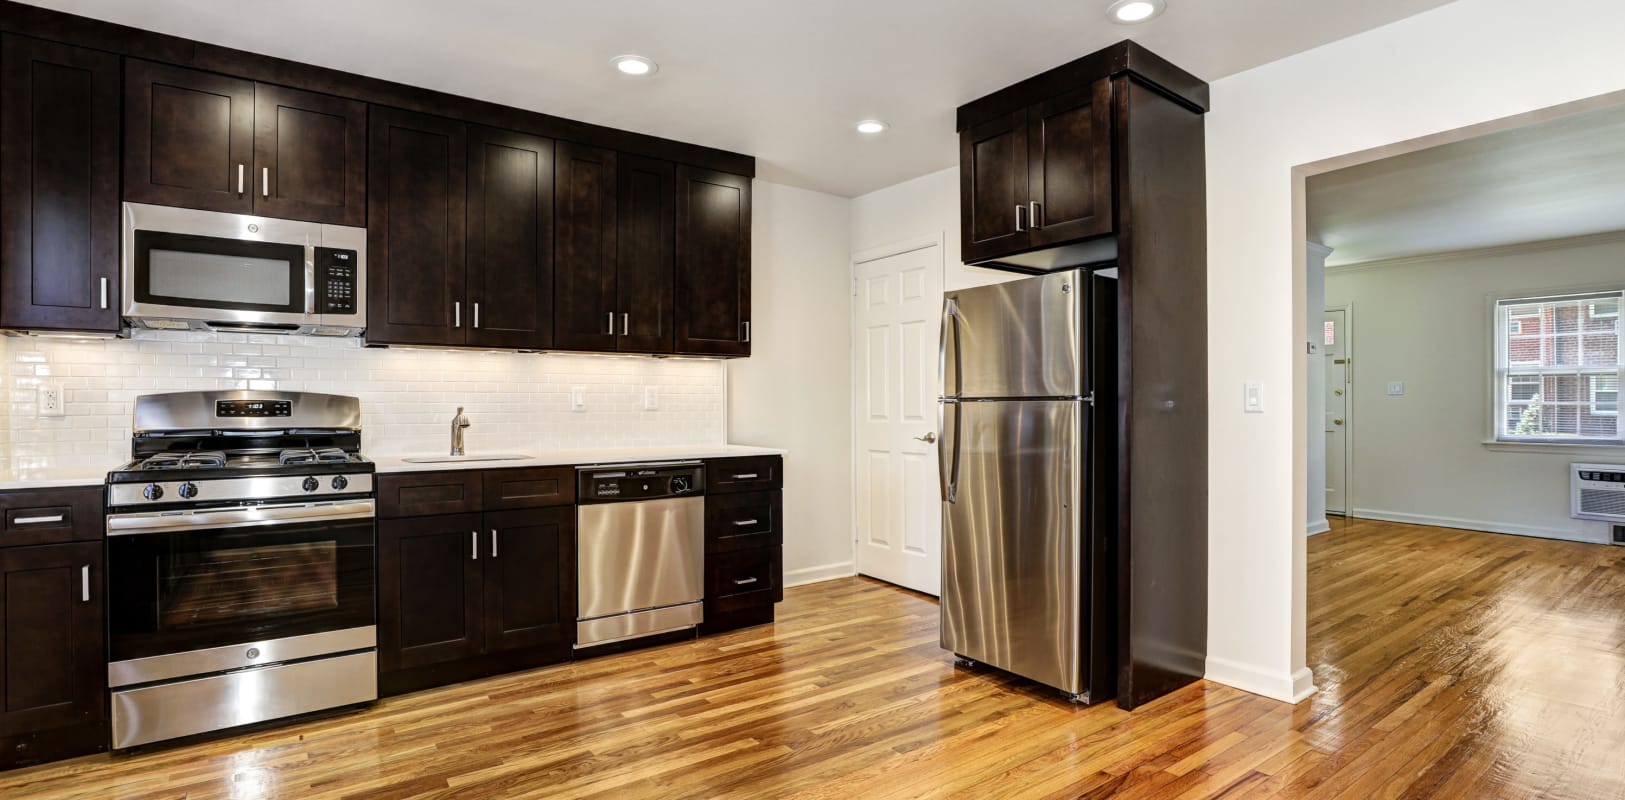 Kitchen with stainless-steel appliances at General Wayne Townhomes and Ridgedale Gardens in Madison, New Jersey